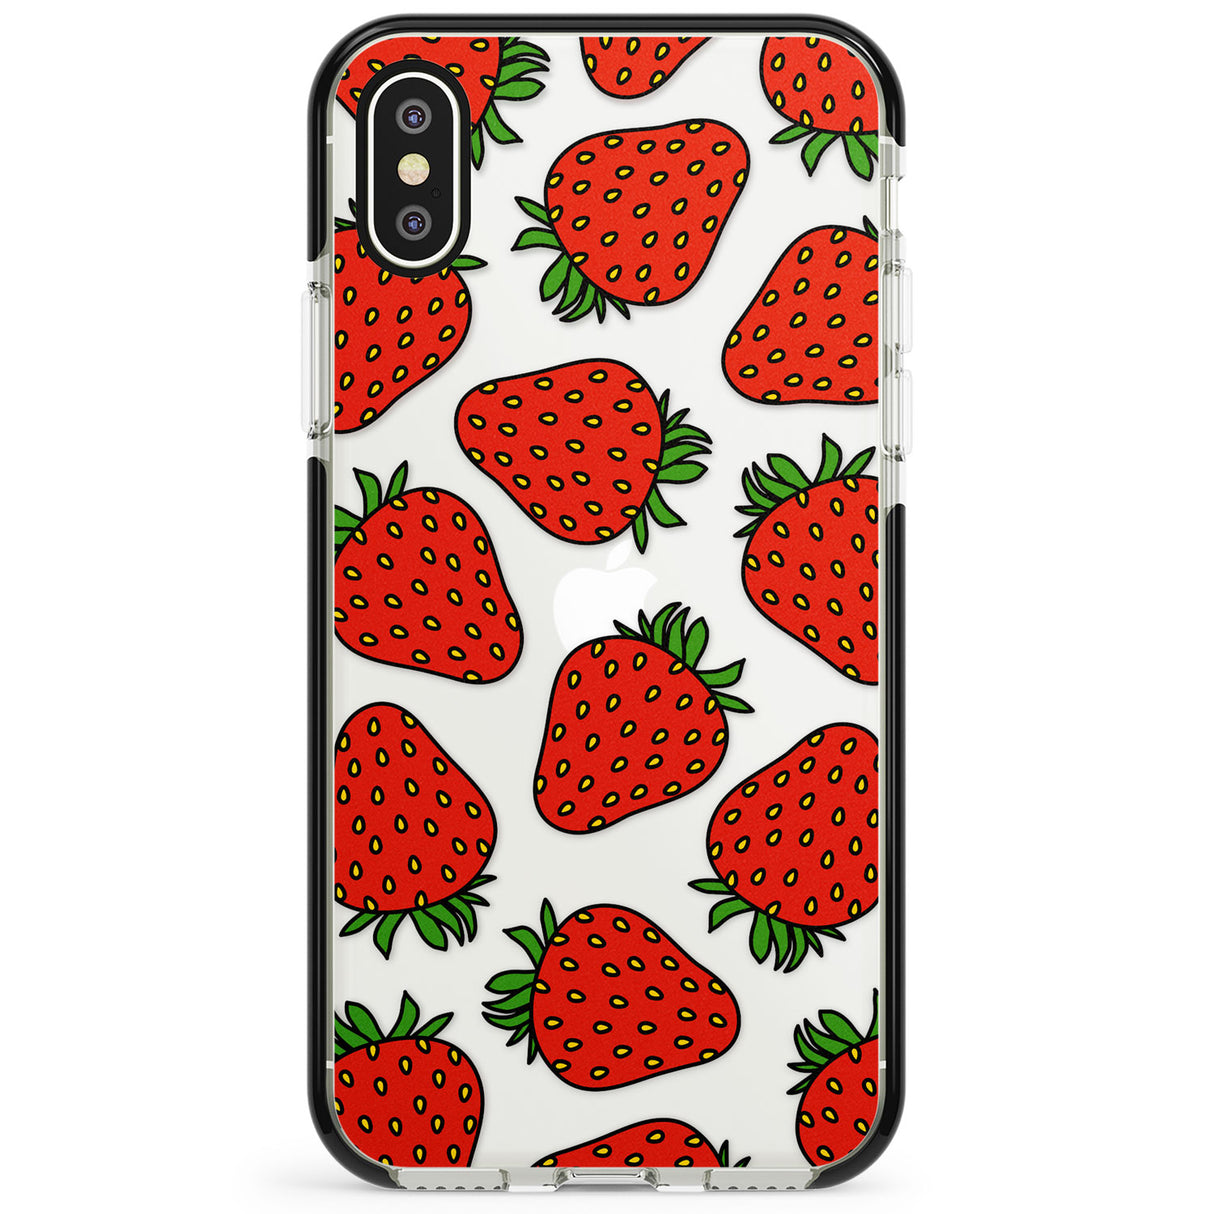 Strawberry Pattern Phone Case for iPhone X XS Max XR